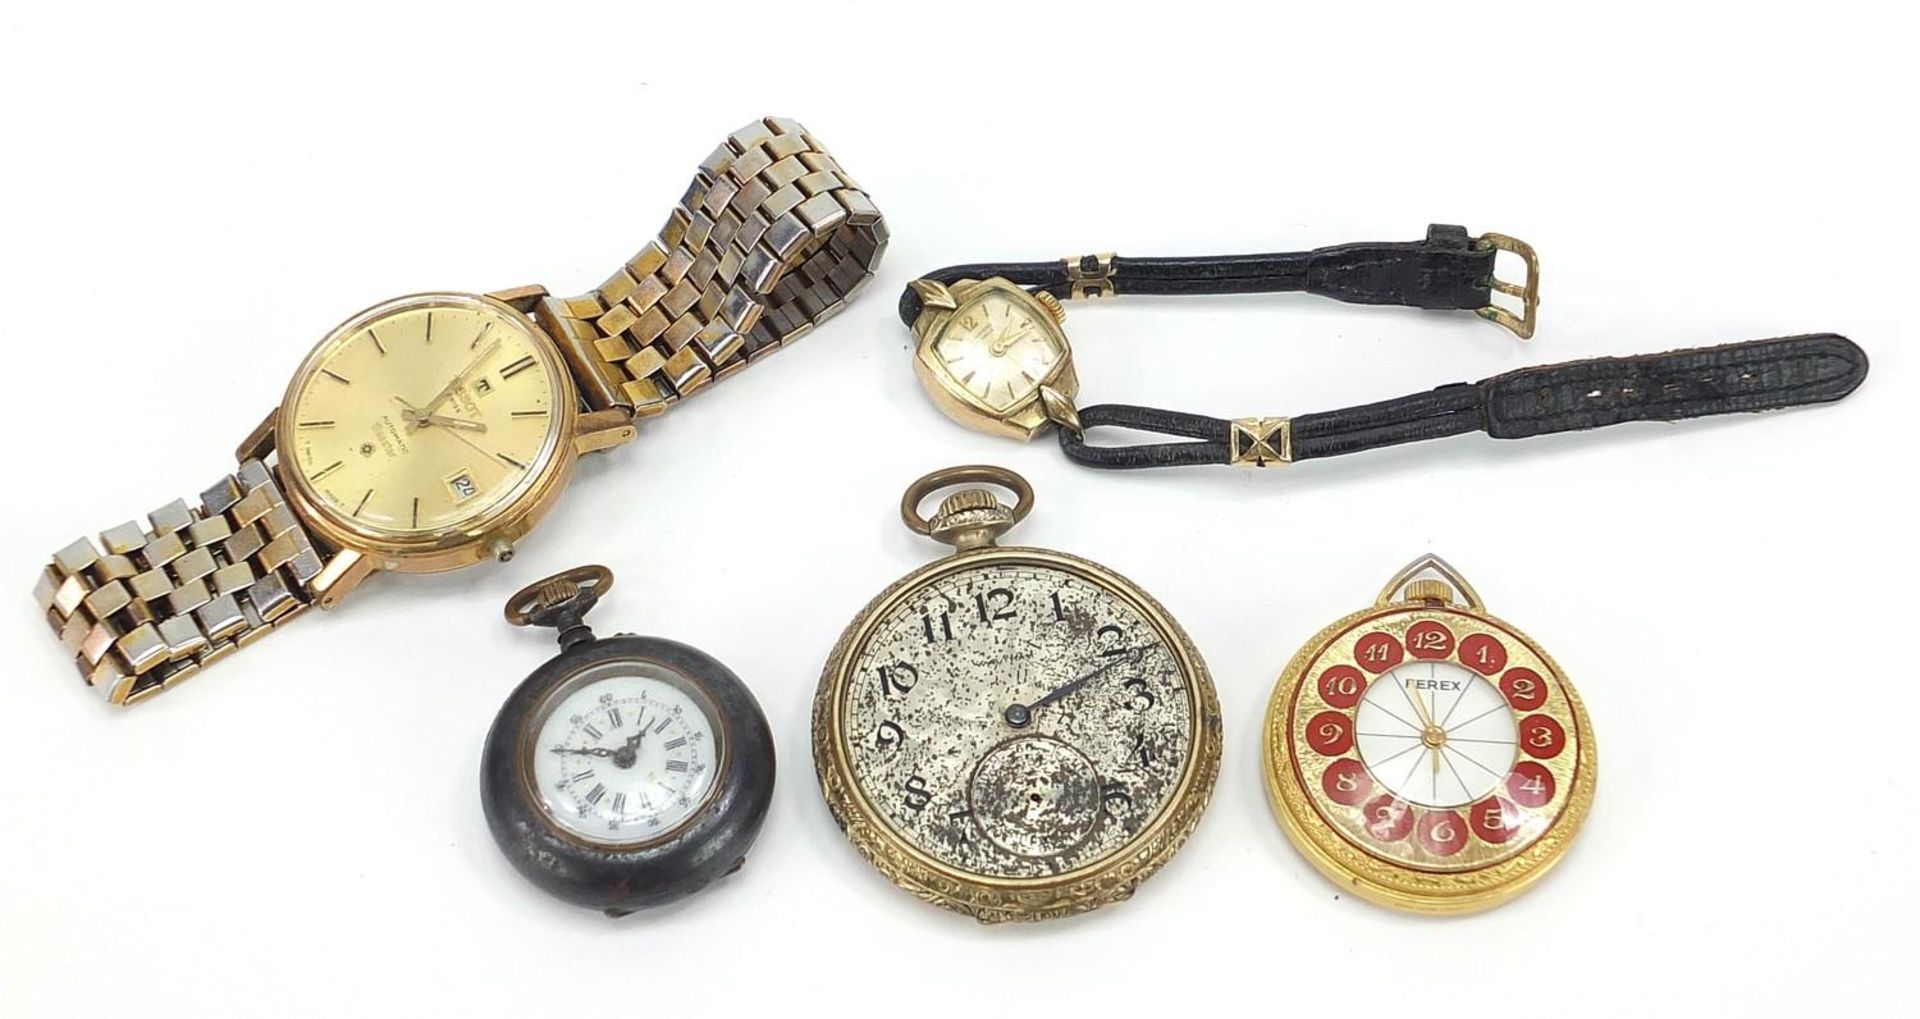 Vintage and later watches including Tissot Seastar, Waltham, Junghans and a gun metal pocket watch :